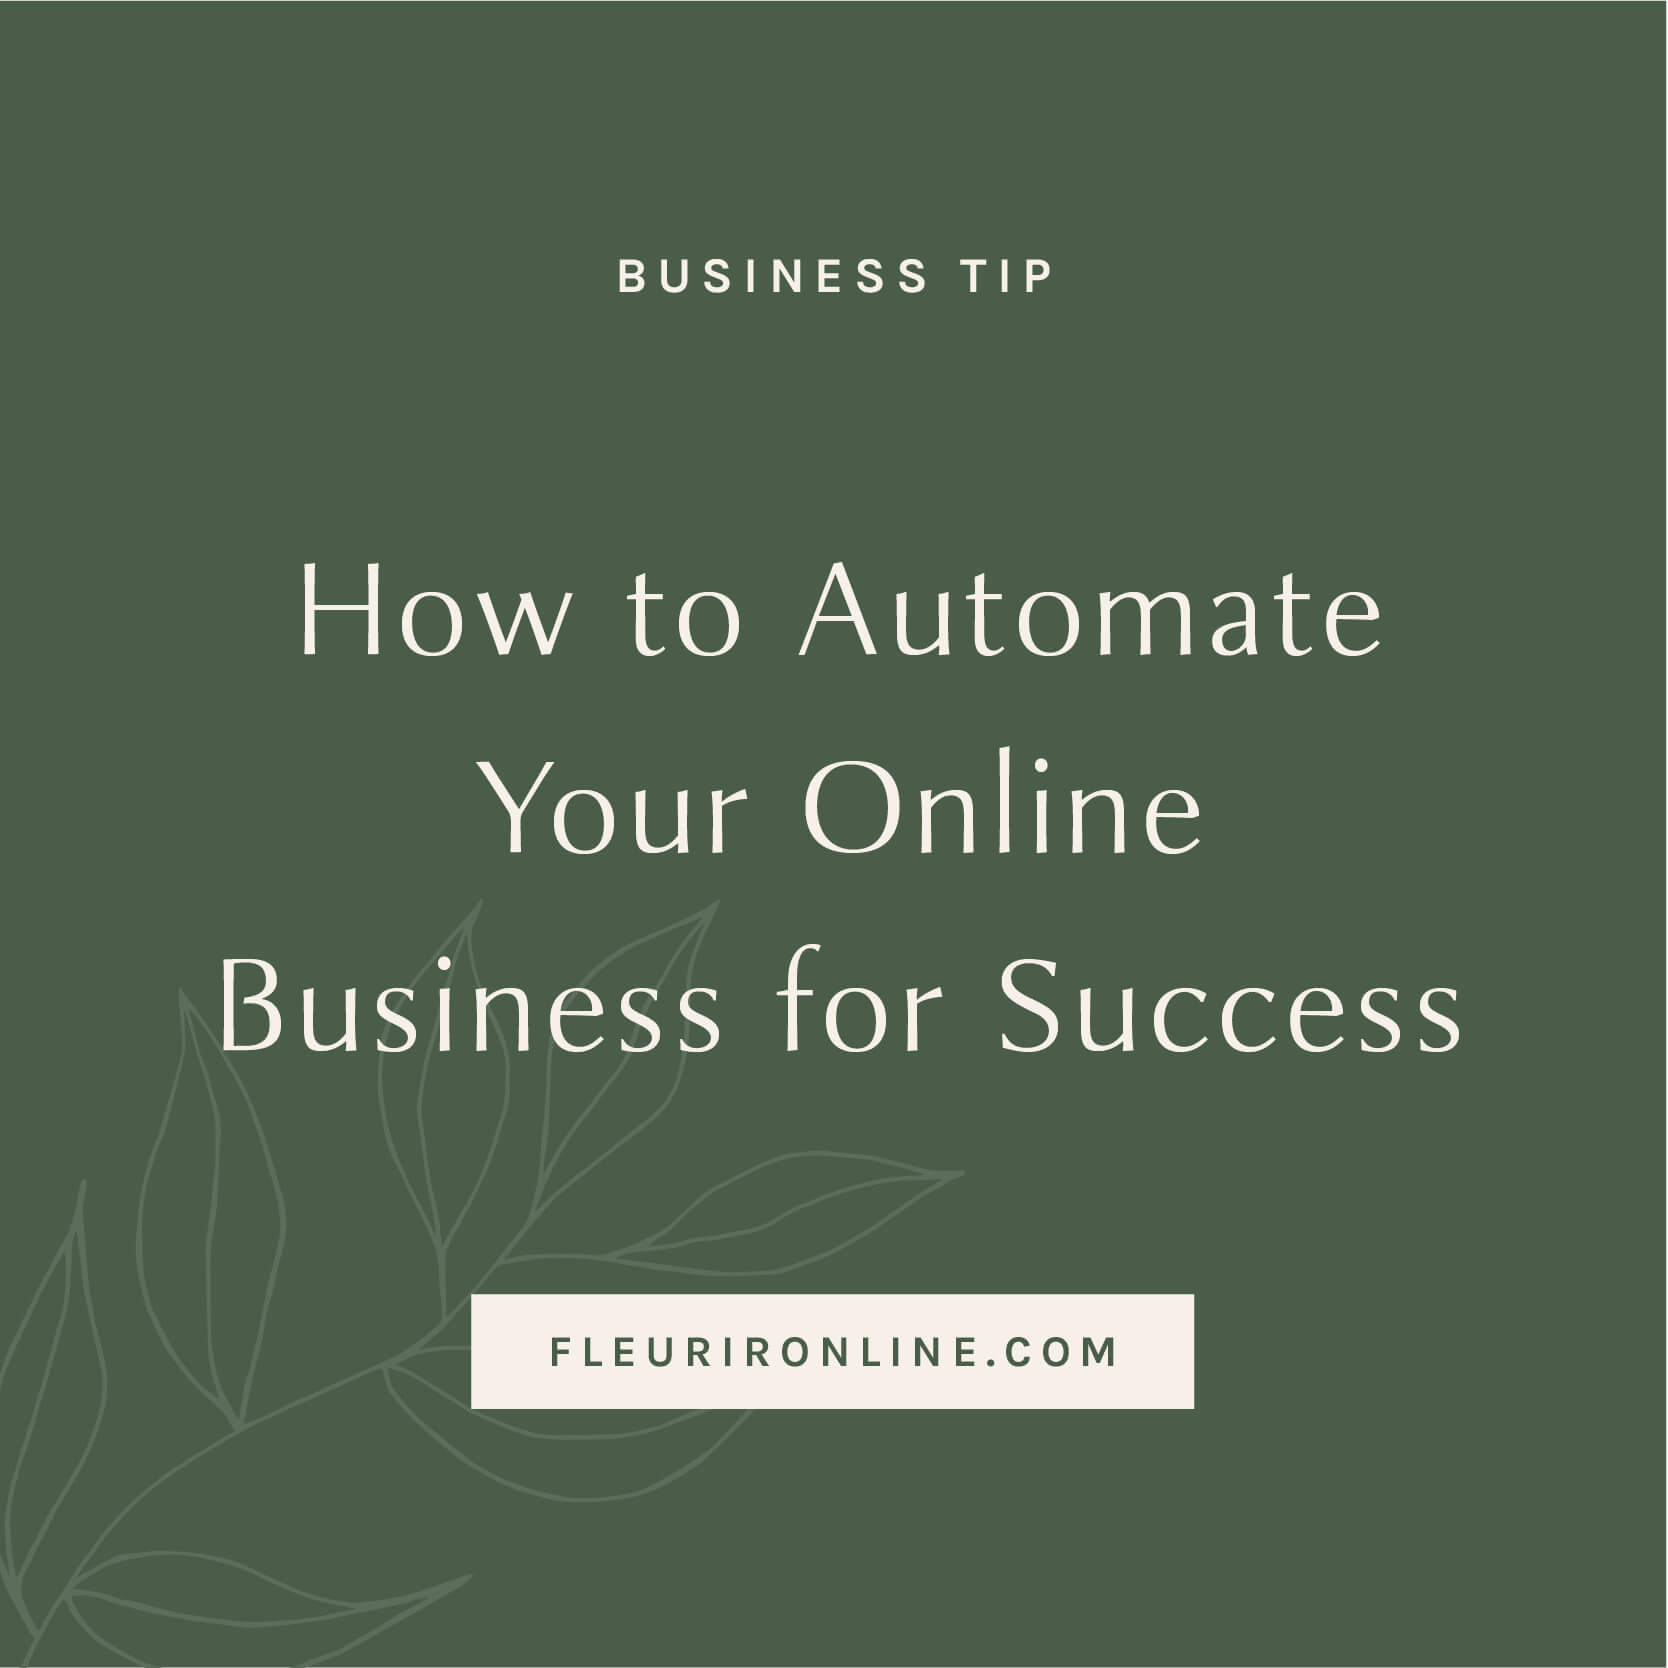 How to automate your online business for success